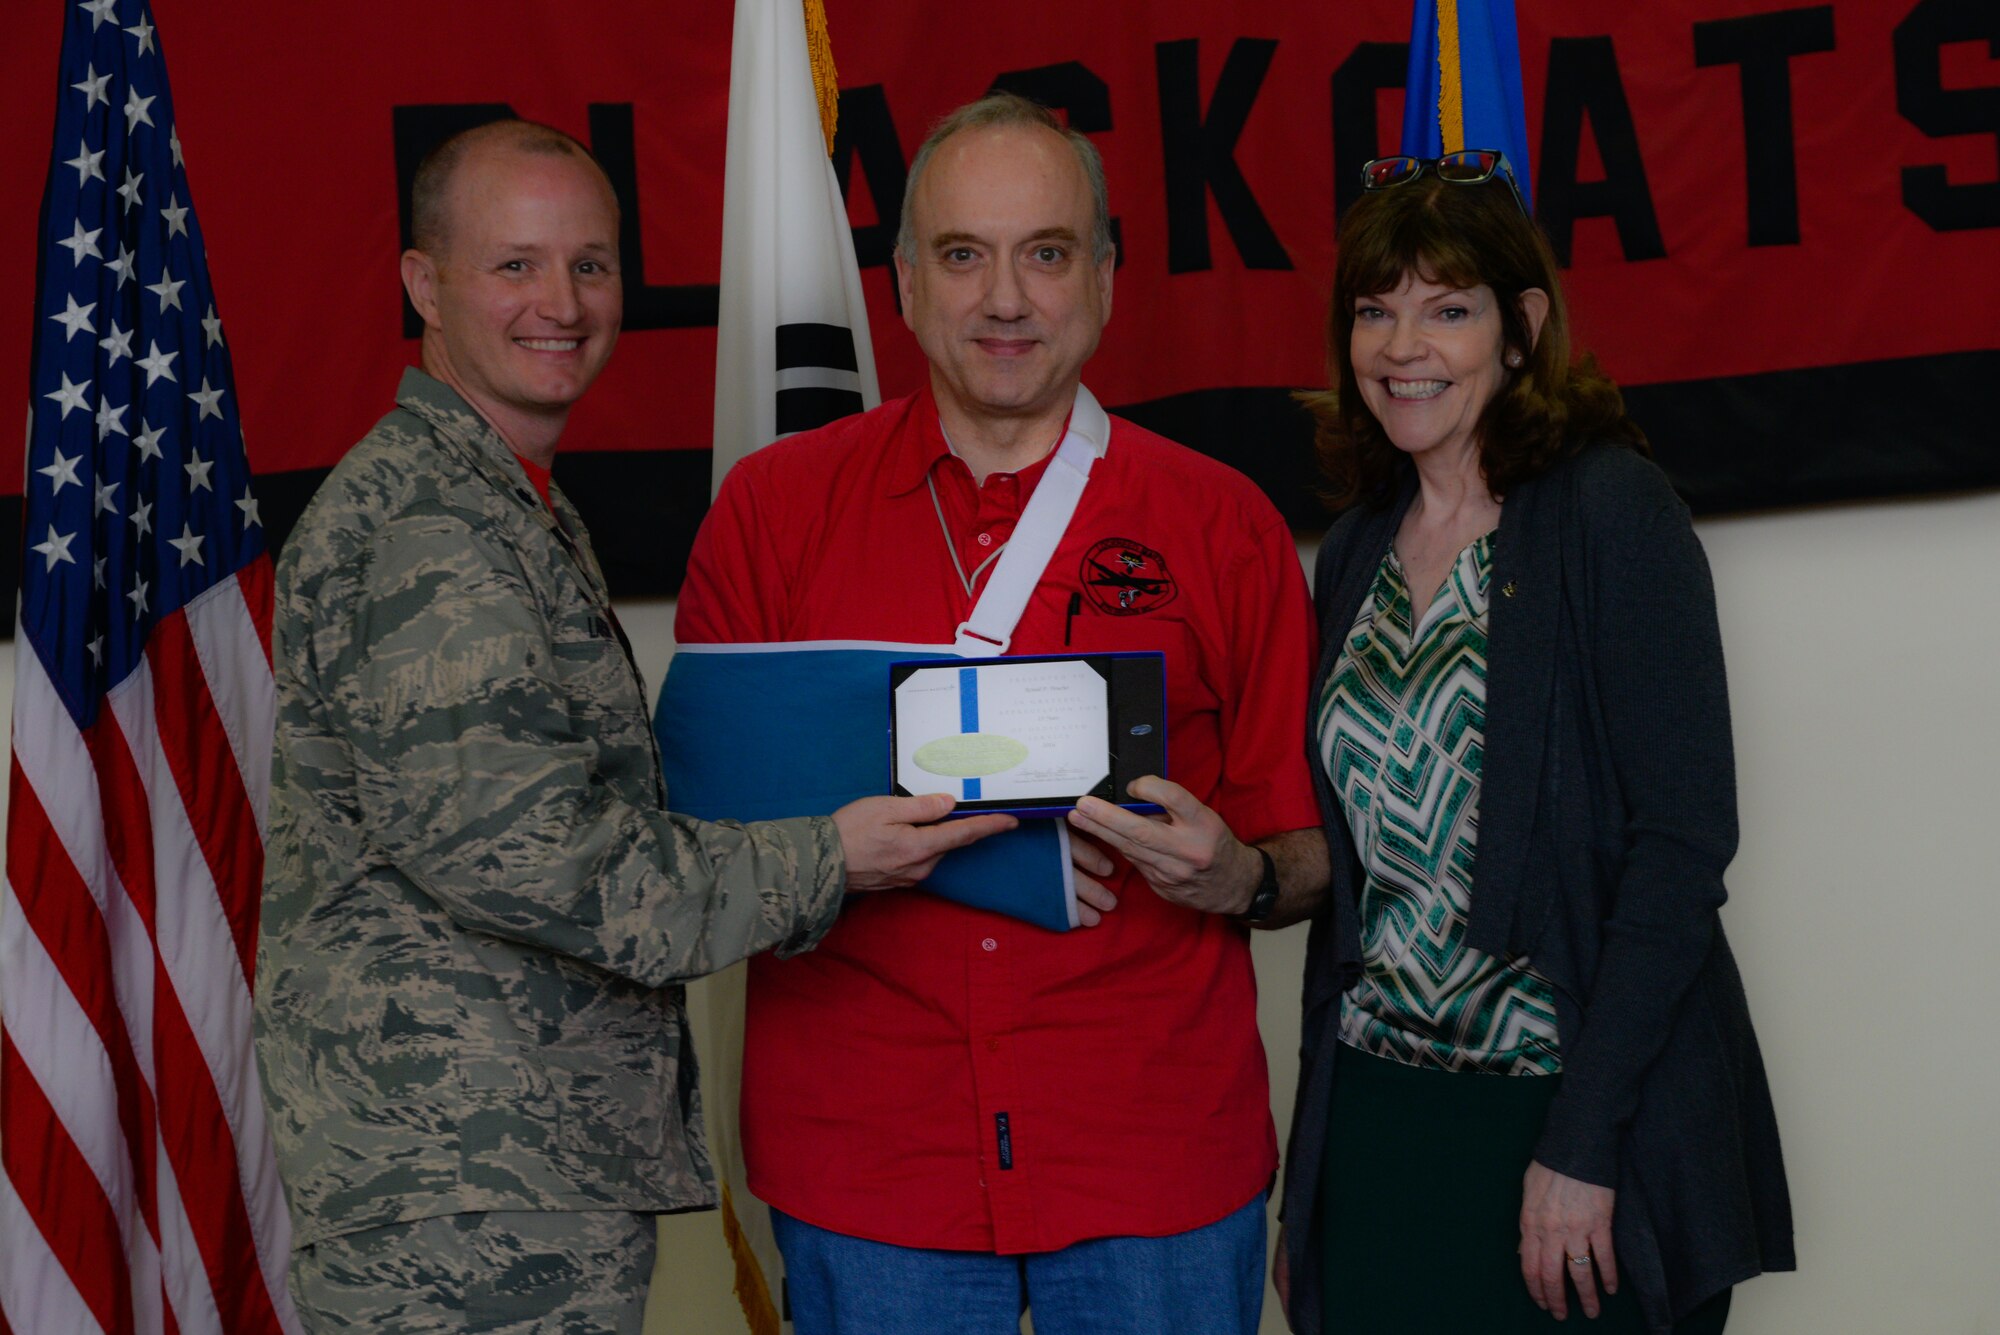 Lt. Col. Todd Larsen, 5th Reconnaissance Squadron commander, presents a certificate of appreciation to Robert Boucher, Lockheed Martin mechanical engineer, during the 40th Anniversary U-2 Ceremony May 6, 2016, at Osan Air Base, Republic of Korea. Larsen thanked Boucher for his contributions to the 5th RS through supporting the U-2 Dragon Lady aircraft. (U.S. Air Force photo by Senior Airman Dillian Bamman/Released)